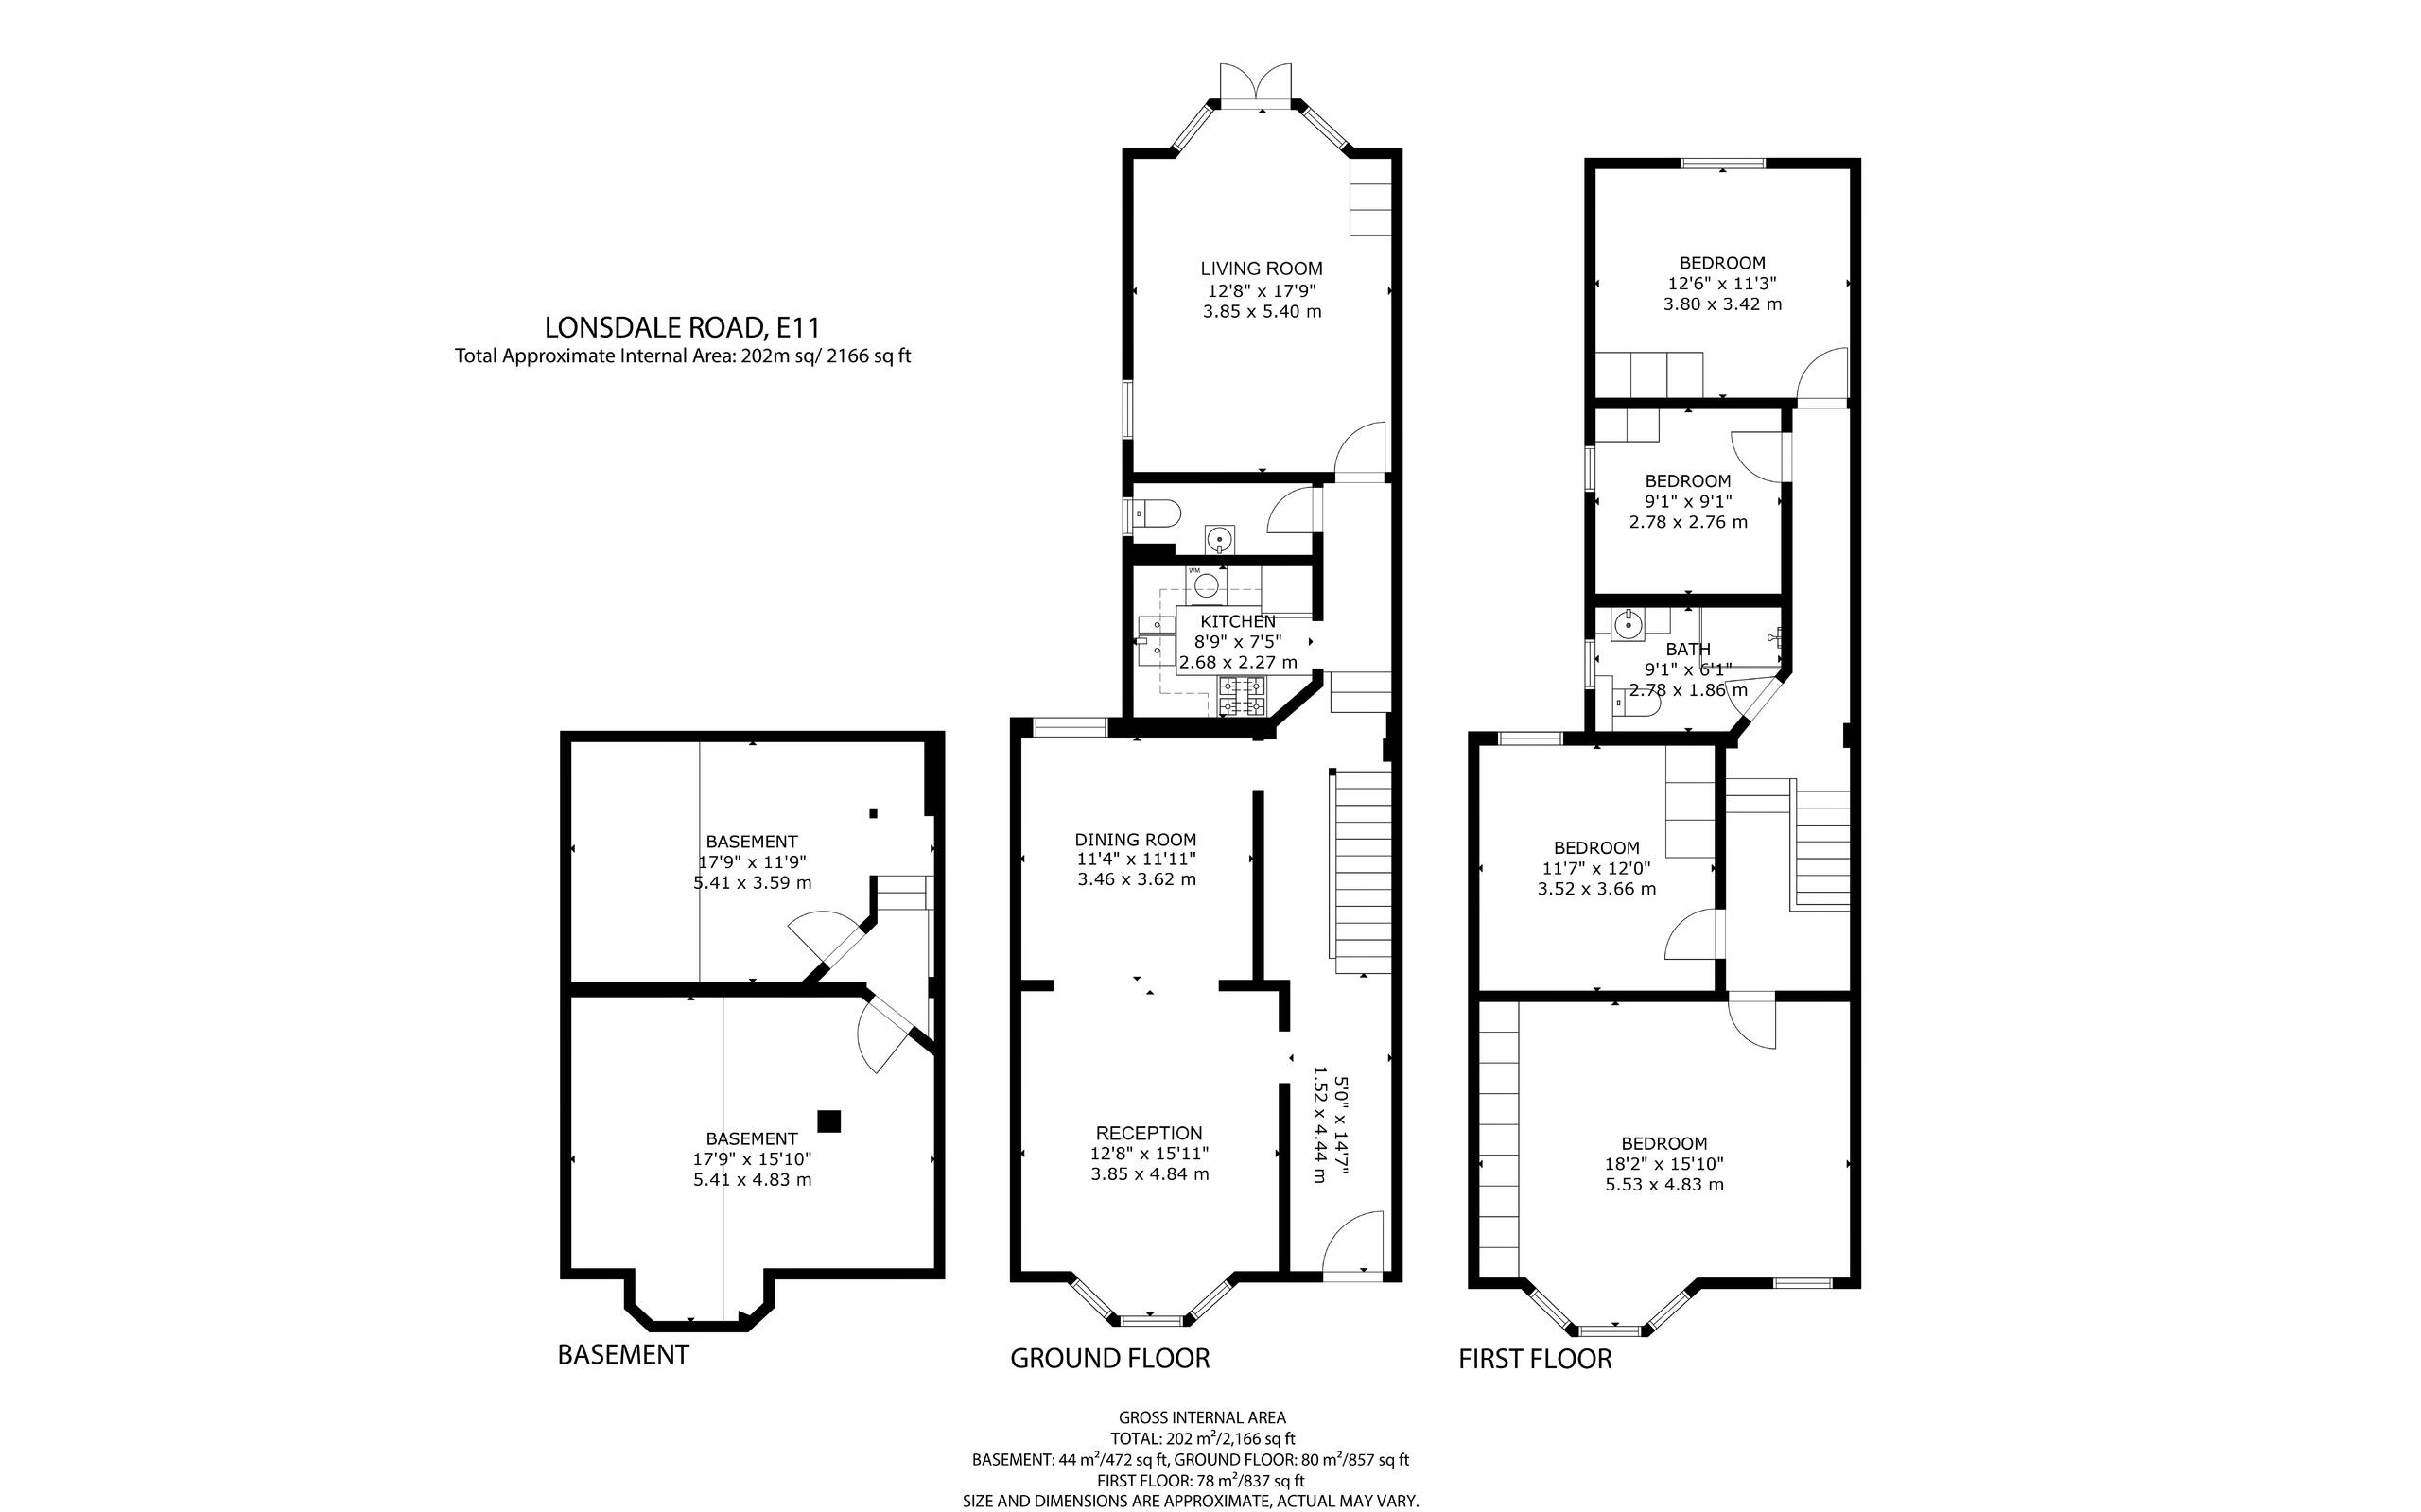 4 bed terraced house for sale in Lonsdale Road, Wanstead - Property floorplan